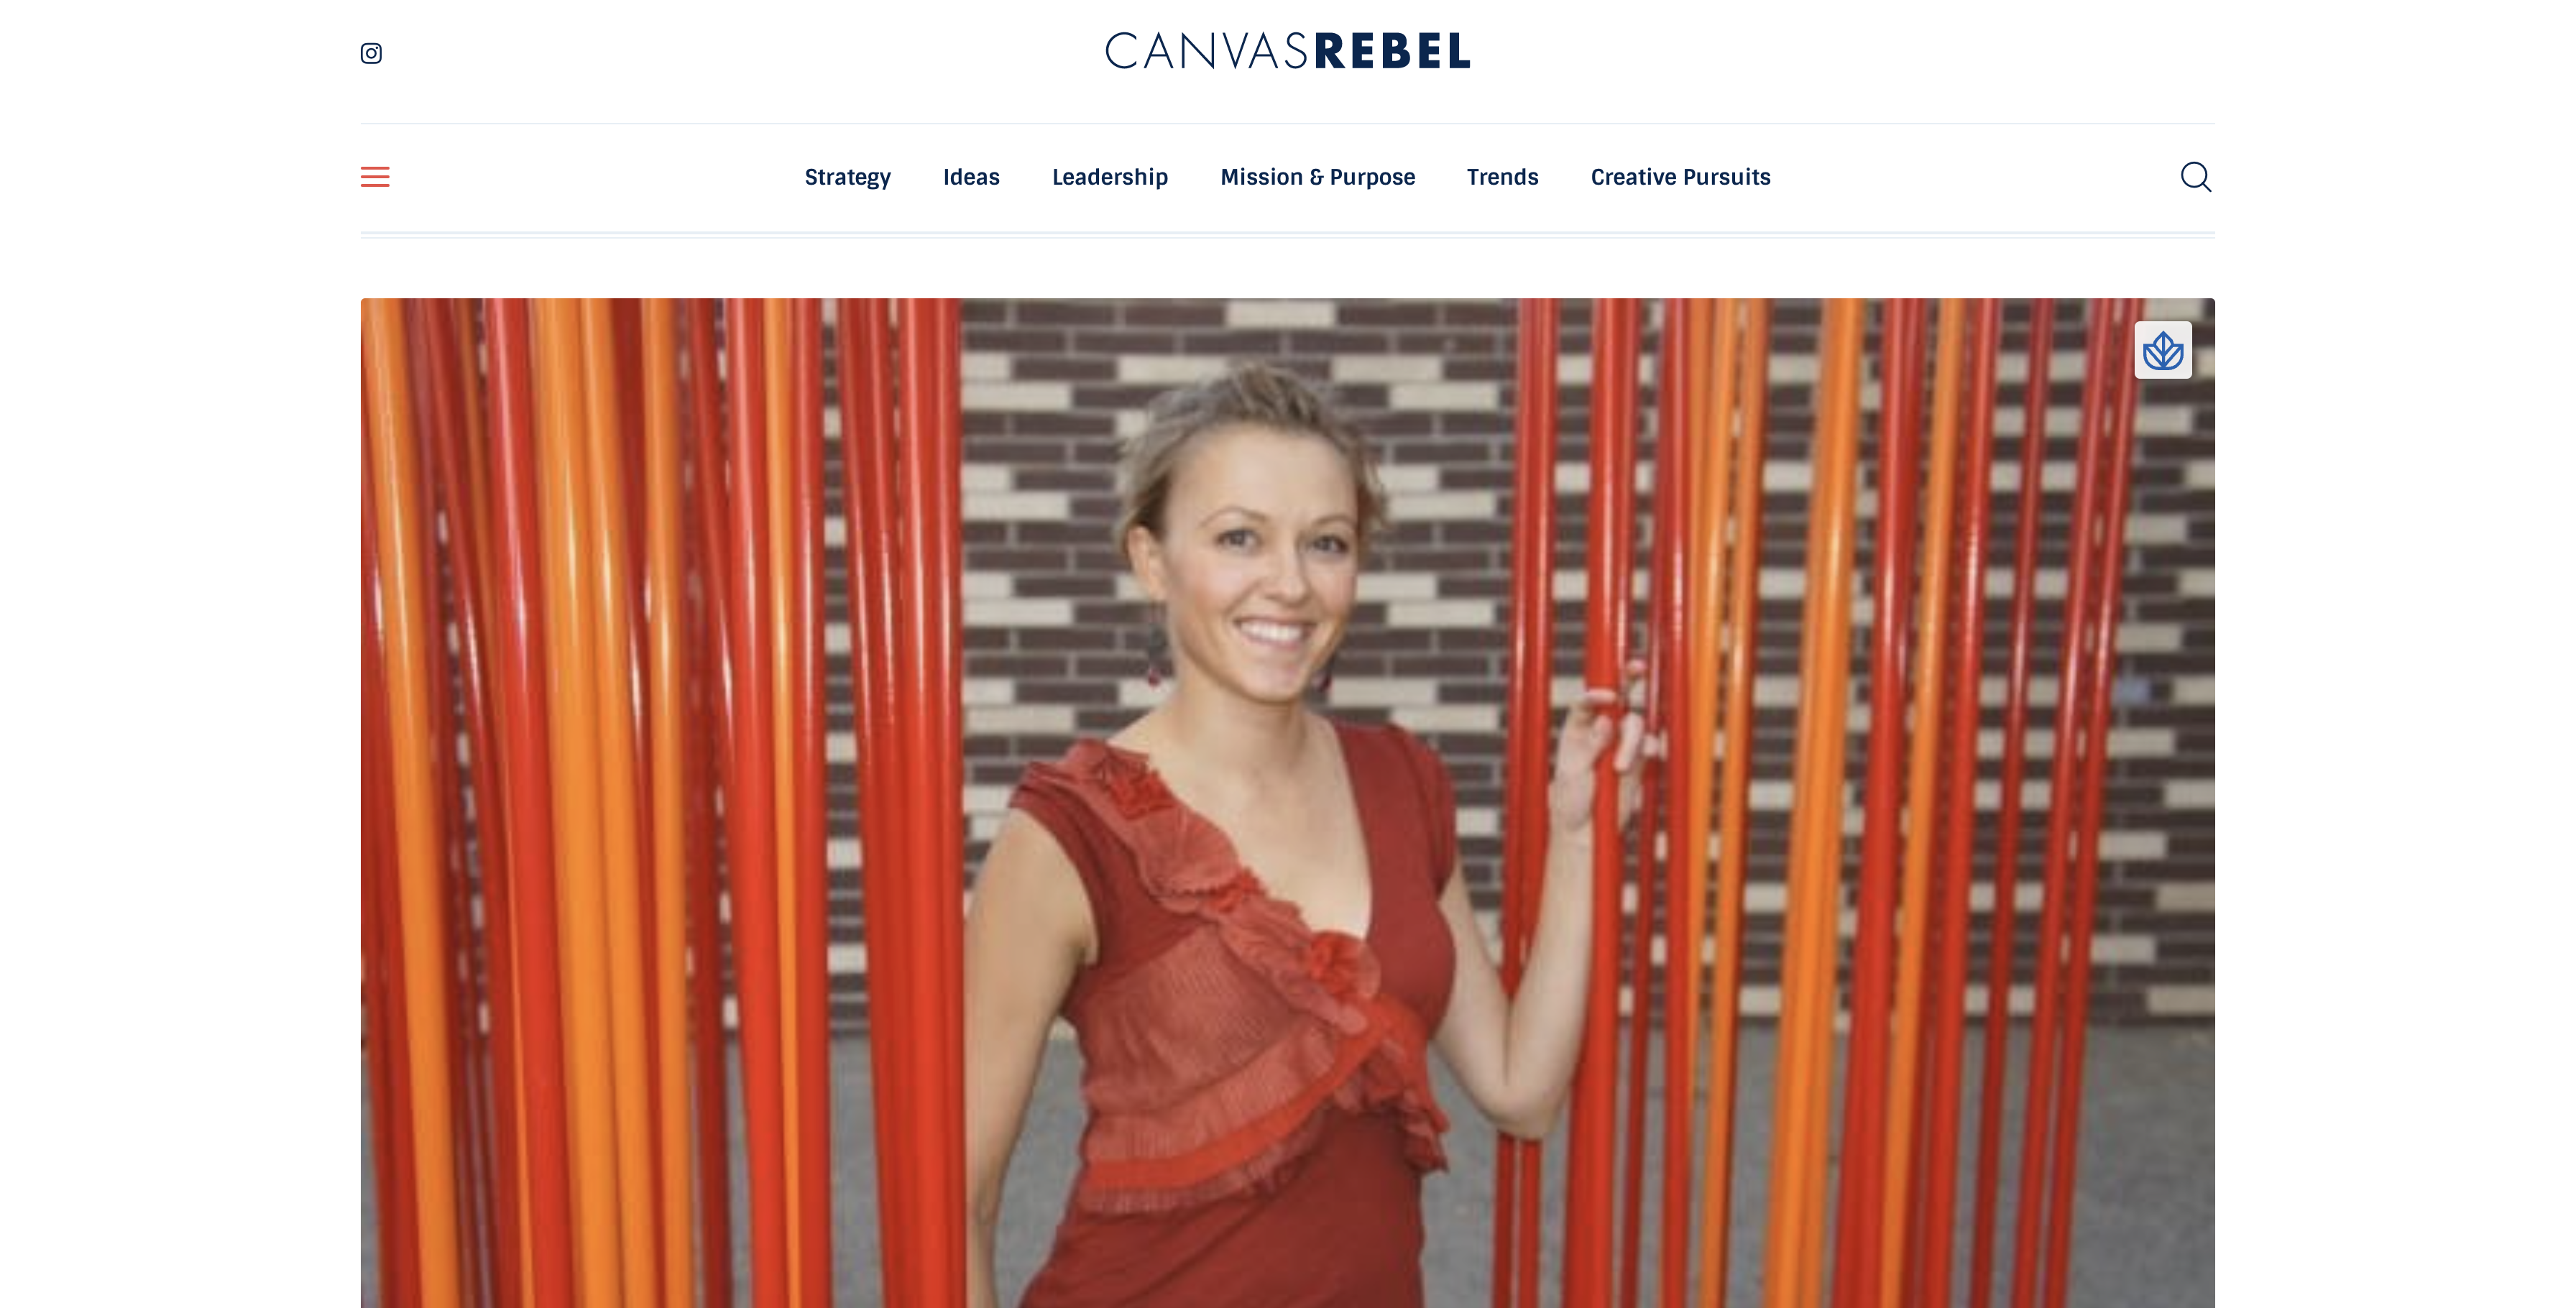 Image of female interior designer wearing red while standing between red vertical partitions